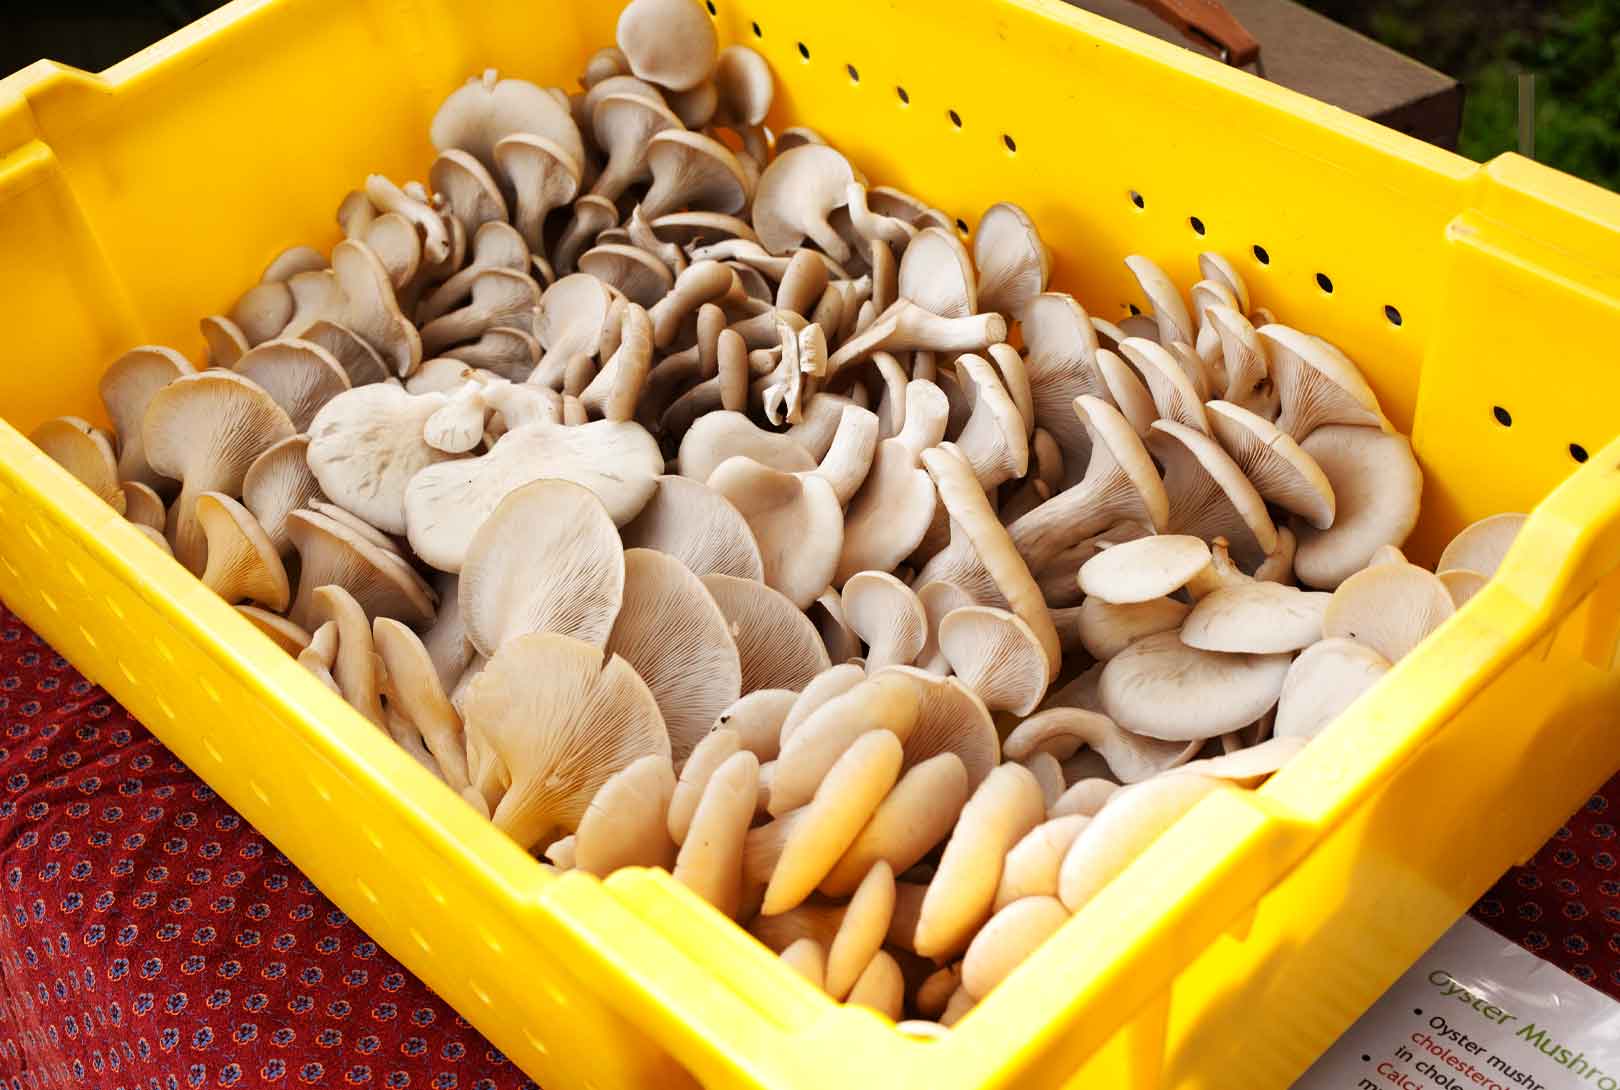 A Large Bin Of Organically Grown Oyster Mushrooms